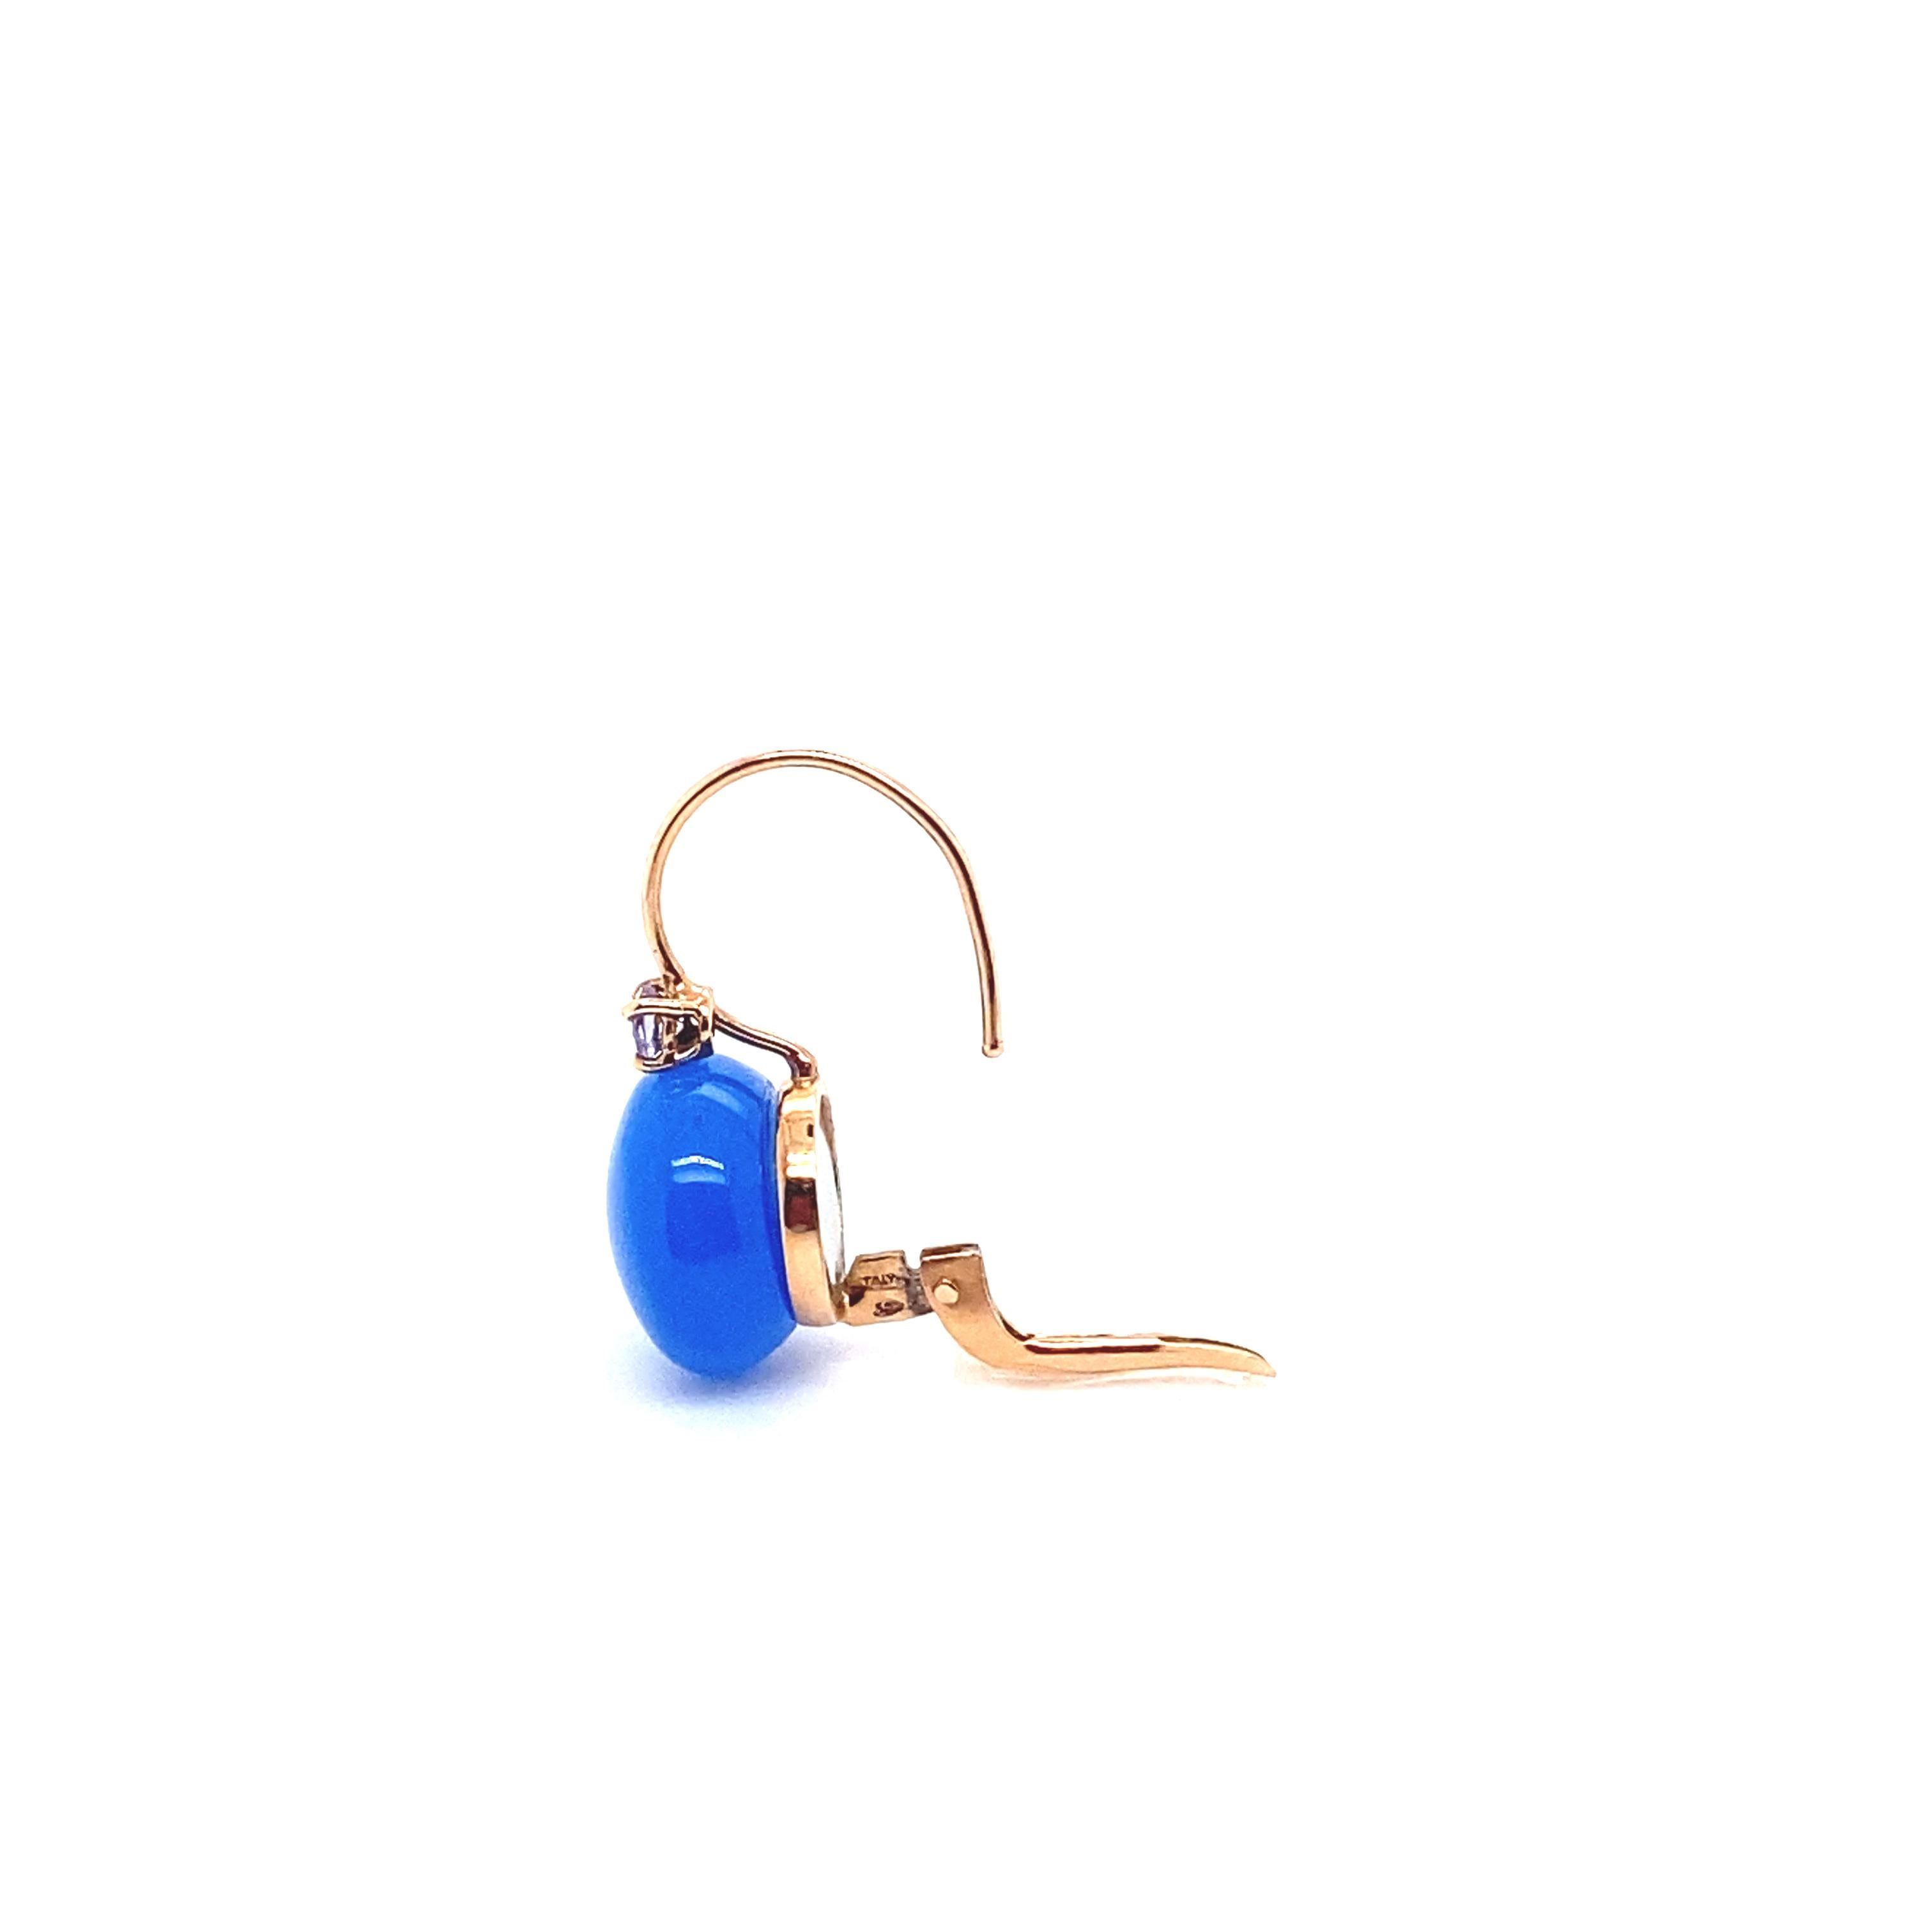 18 Carat Gold Earrings Surmounted by a blue agate and with a Tanzanite 
18 carat gold earring surmounted by a round cut blue agate and accompanied by a brilliant cut tanzanite, 0.14 carats 
The weight of gold is 2.5 g. 
The Blue Agate measures 1.3